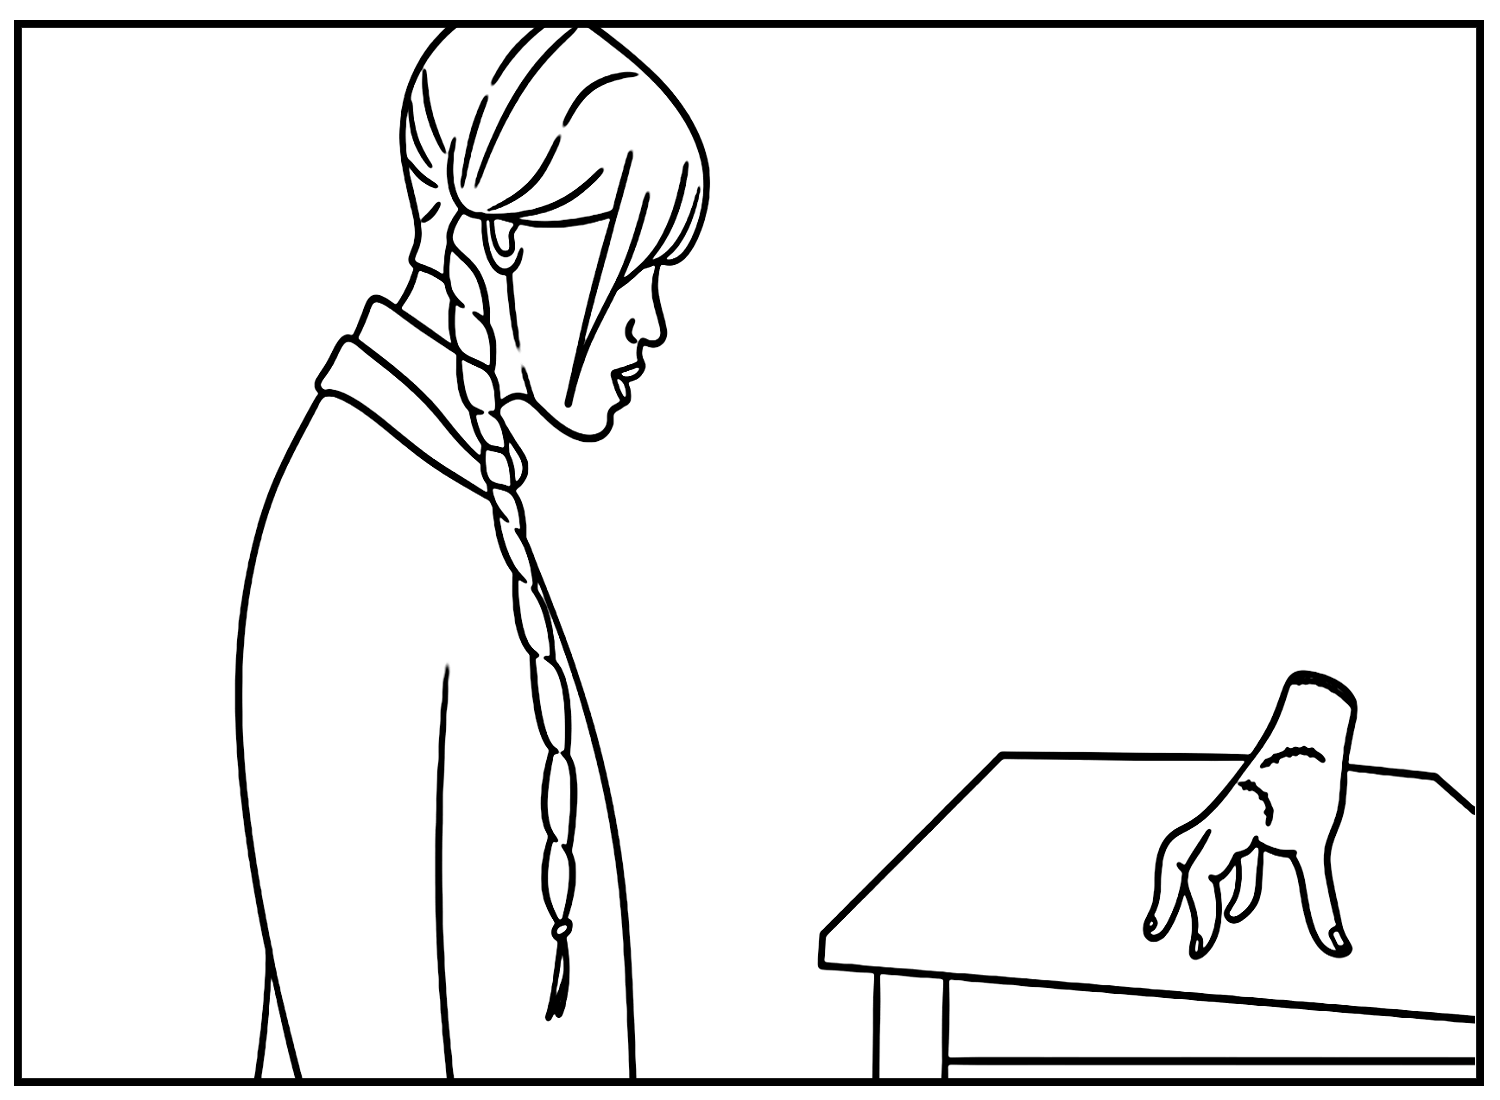 Wednesday Addams and Thing Coloring Page